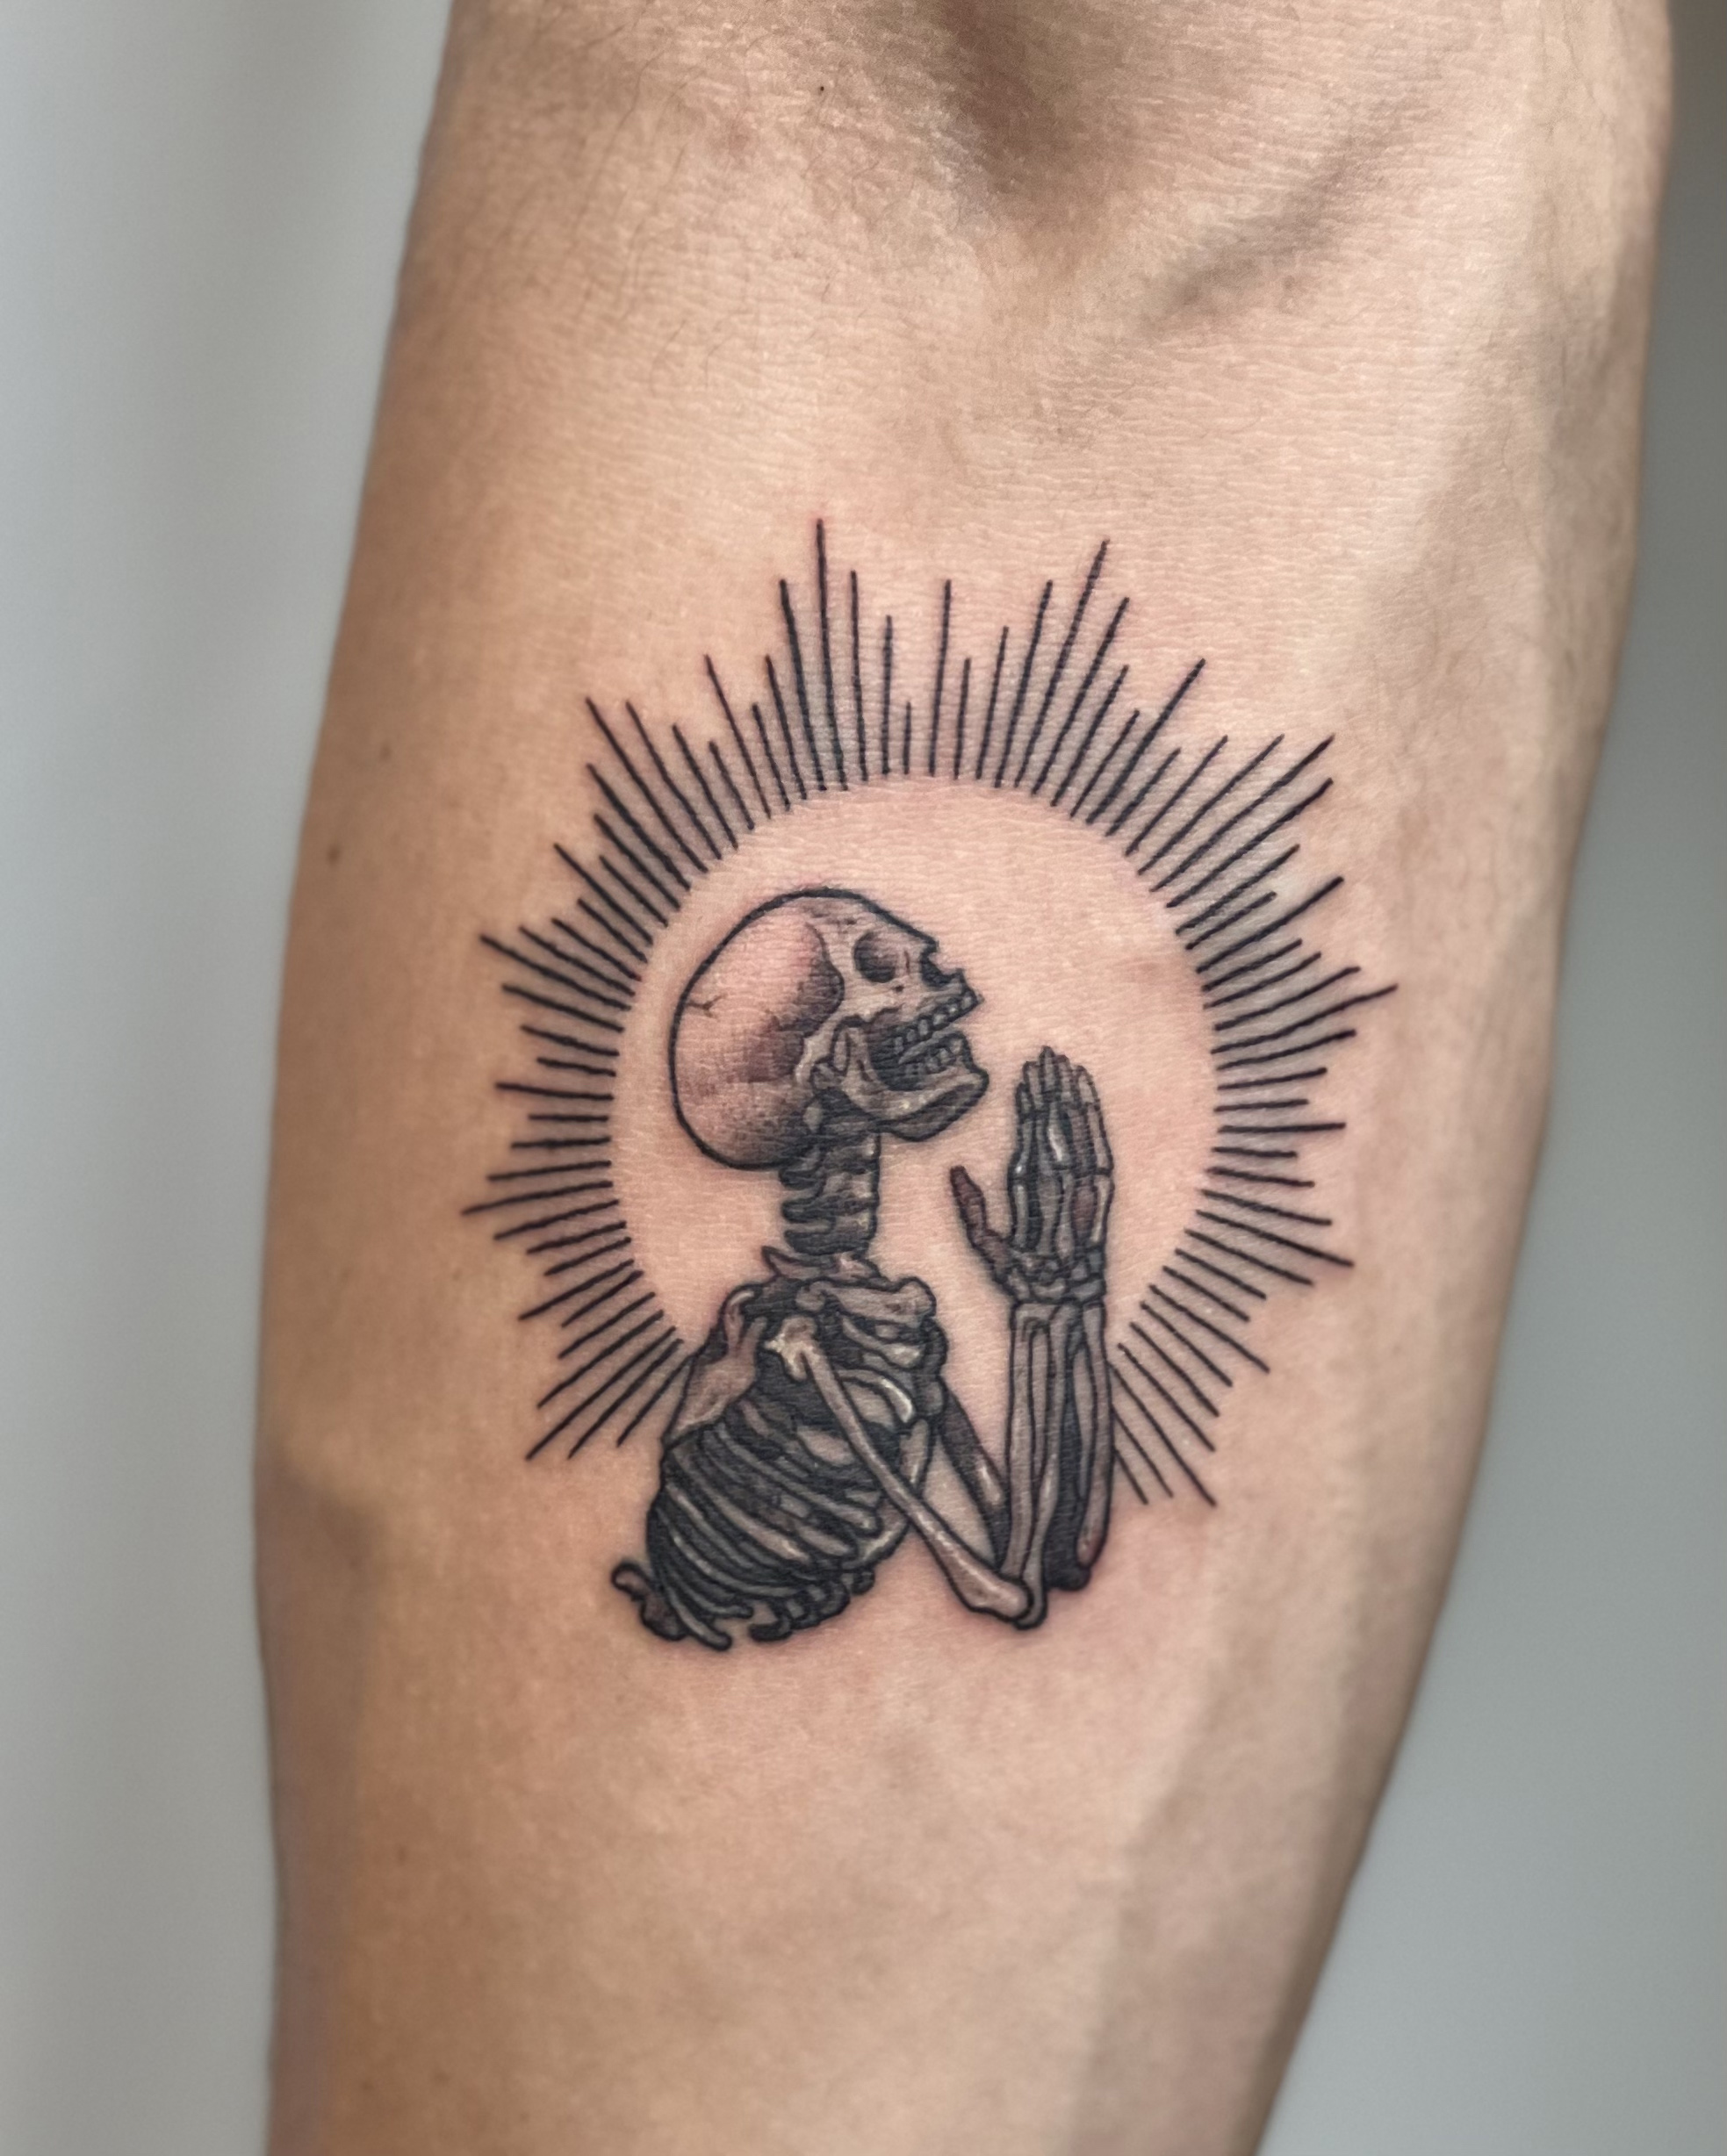 Share more than 63 uicideboy inspired tattoos  thtantai2